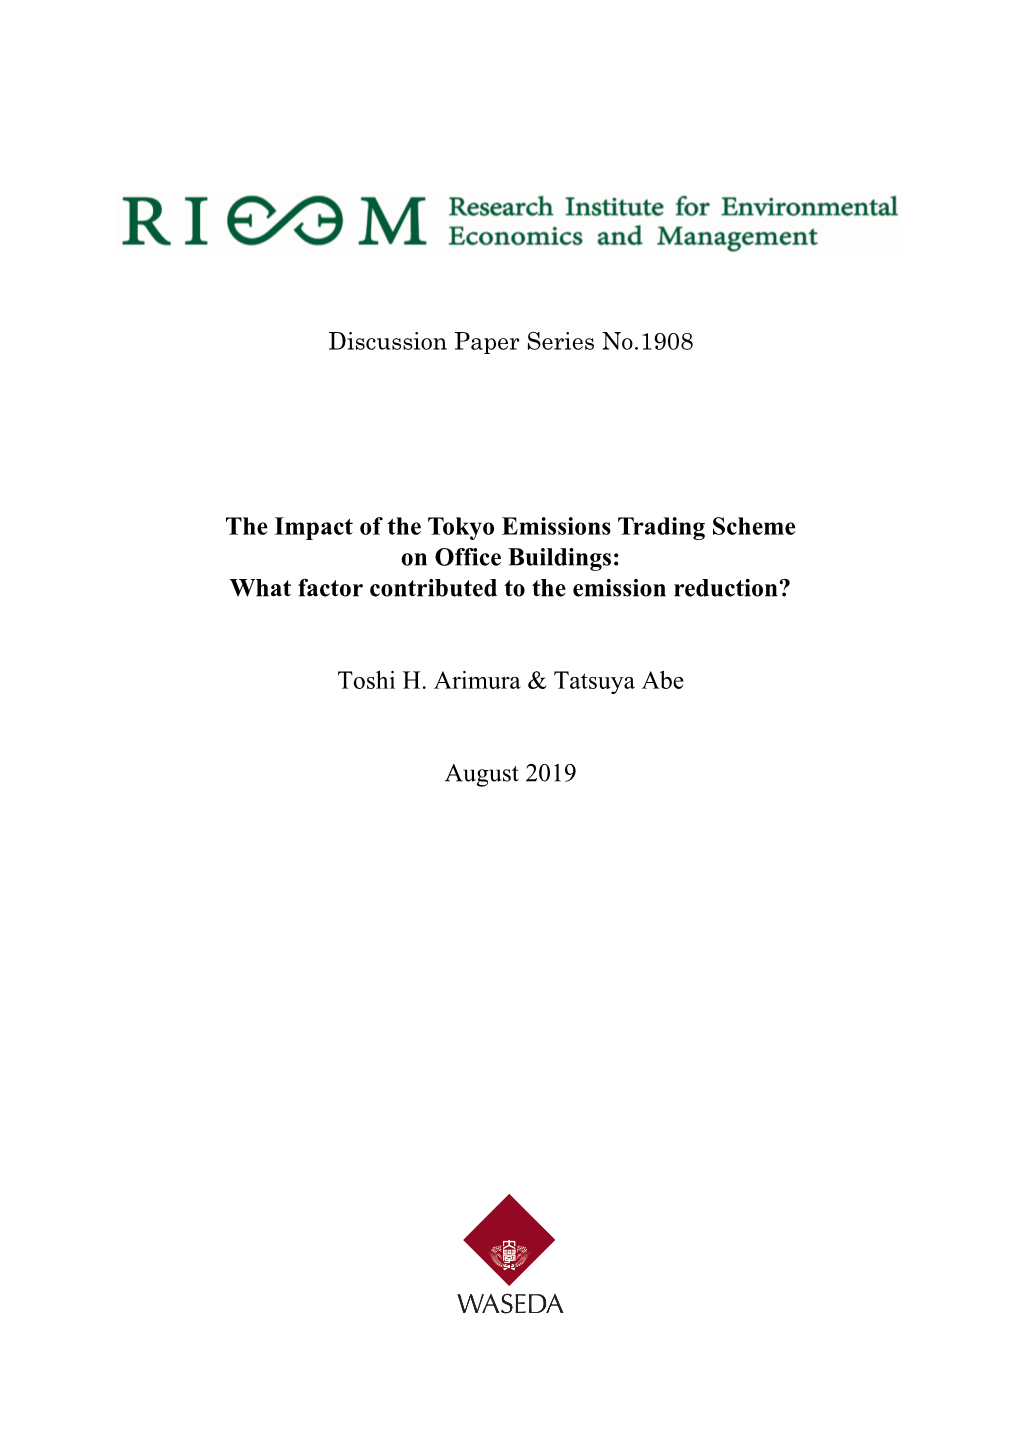 The Impact of the Tokyo Emissions Trading Scheme on Office Buildings: What Factor Contributed to the Emission Reduction?